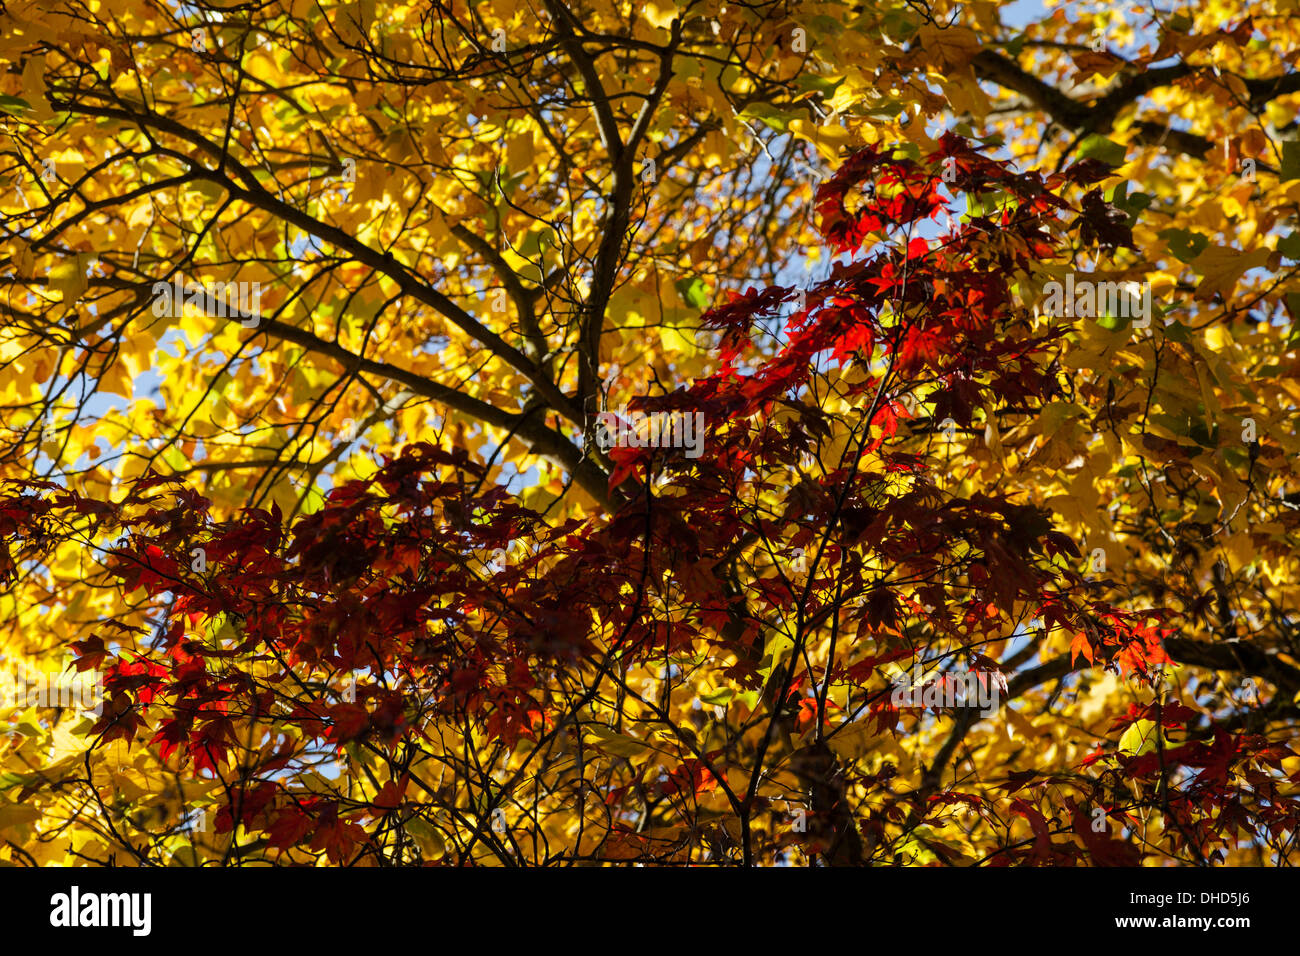 Dark branches against yellow and red backlit Autumn leaves. Stock Photo